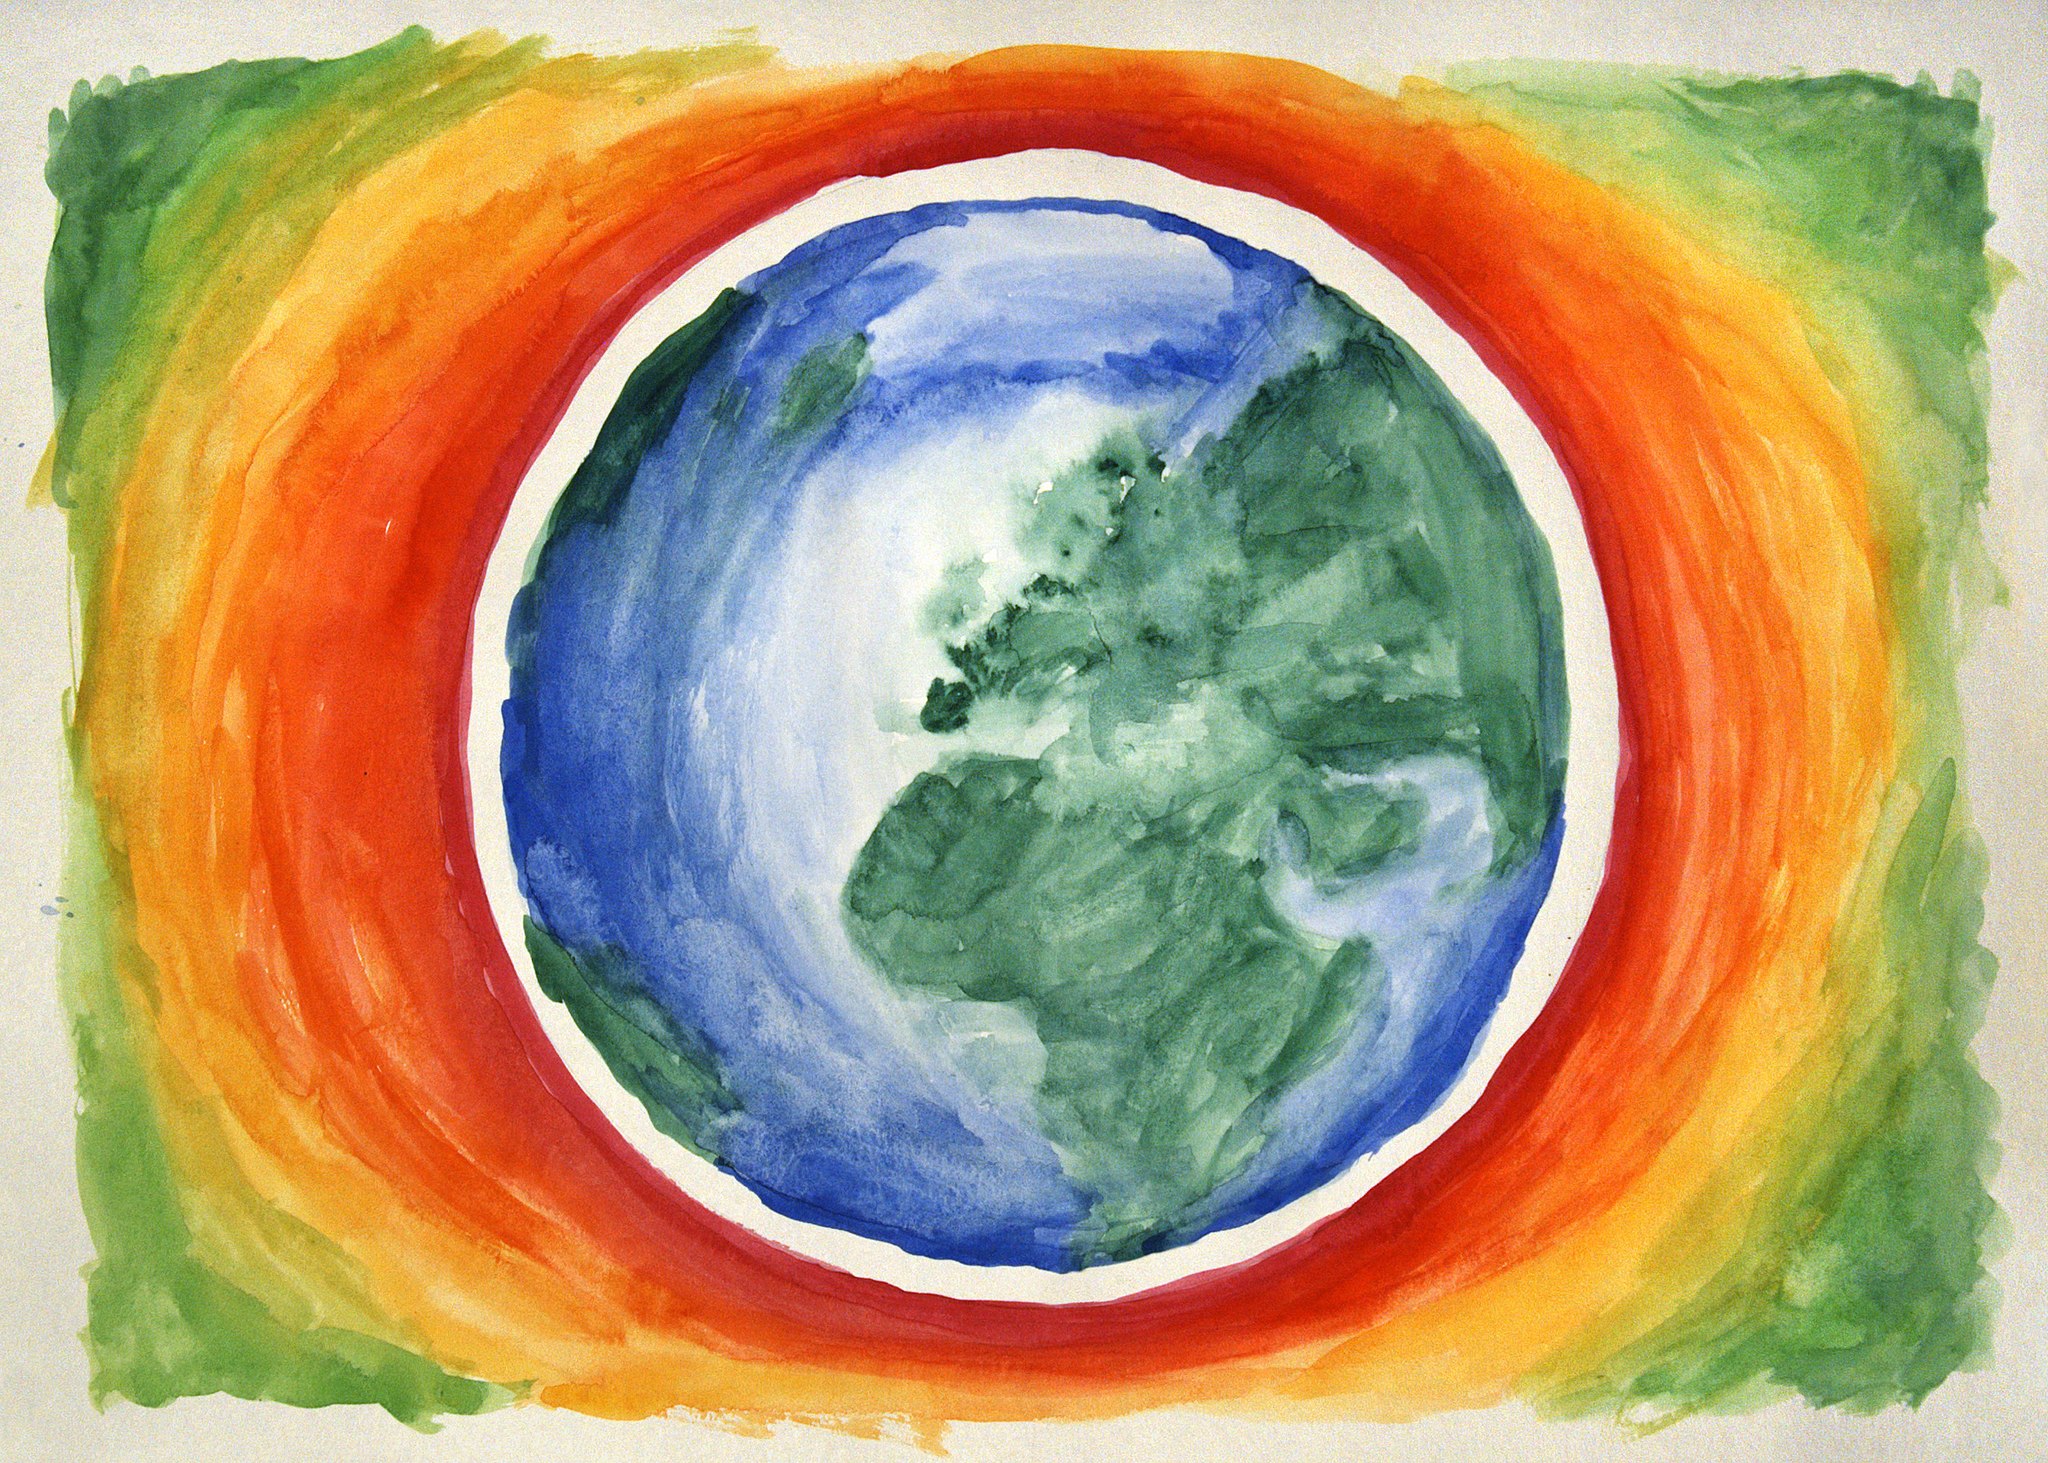 Watercolor painting of the earth with hot gradient (by Martin Eklund, CC0, via Wikimedia Commons).